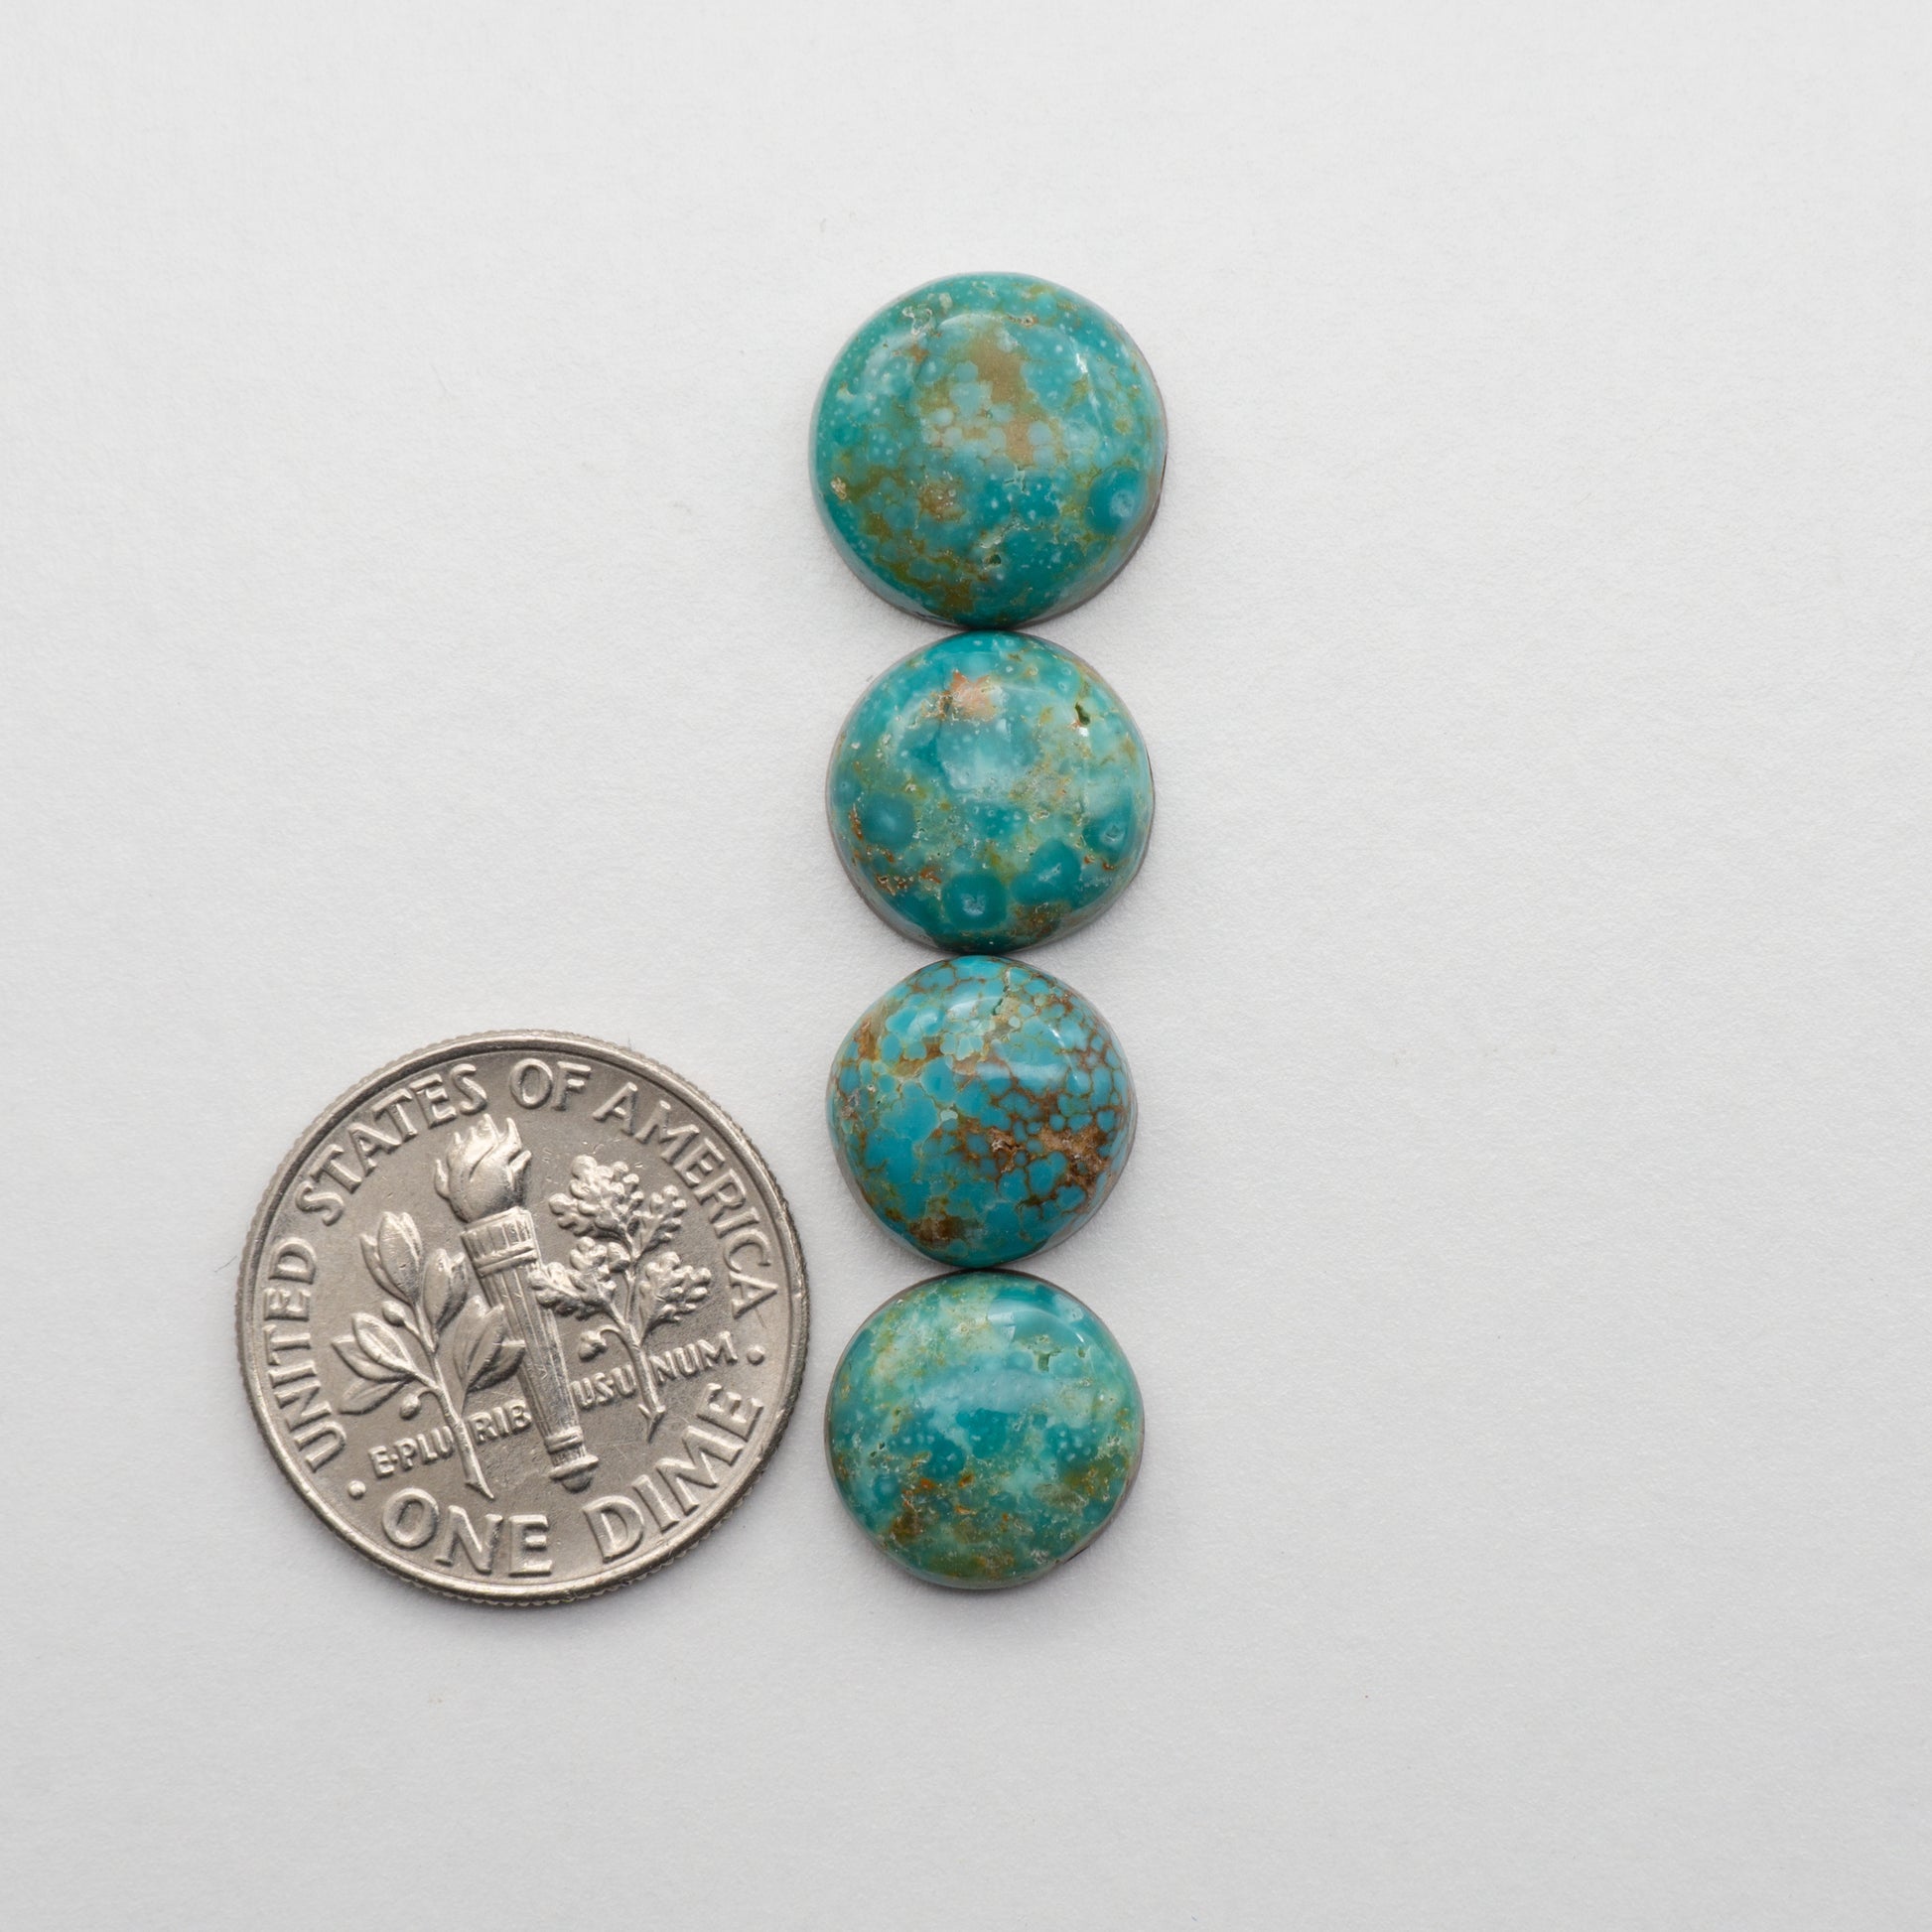 The Cumpas Turquoise is a captivating gemstone with a unique, blue-green color. Derived from a mixture of quartz and algae, this stone is perfect for use in jewelry or other decorative pieces. The natural beauty of the Cumpas Turquoise makes it a stunning addition to any collection.